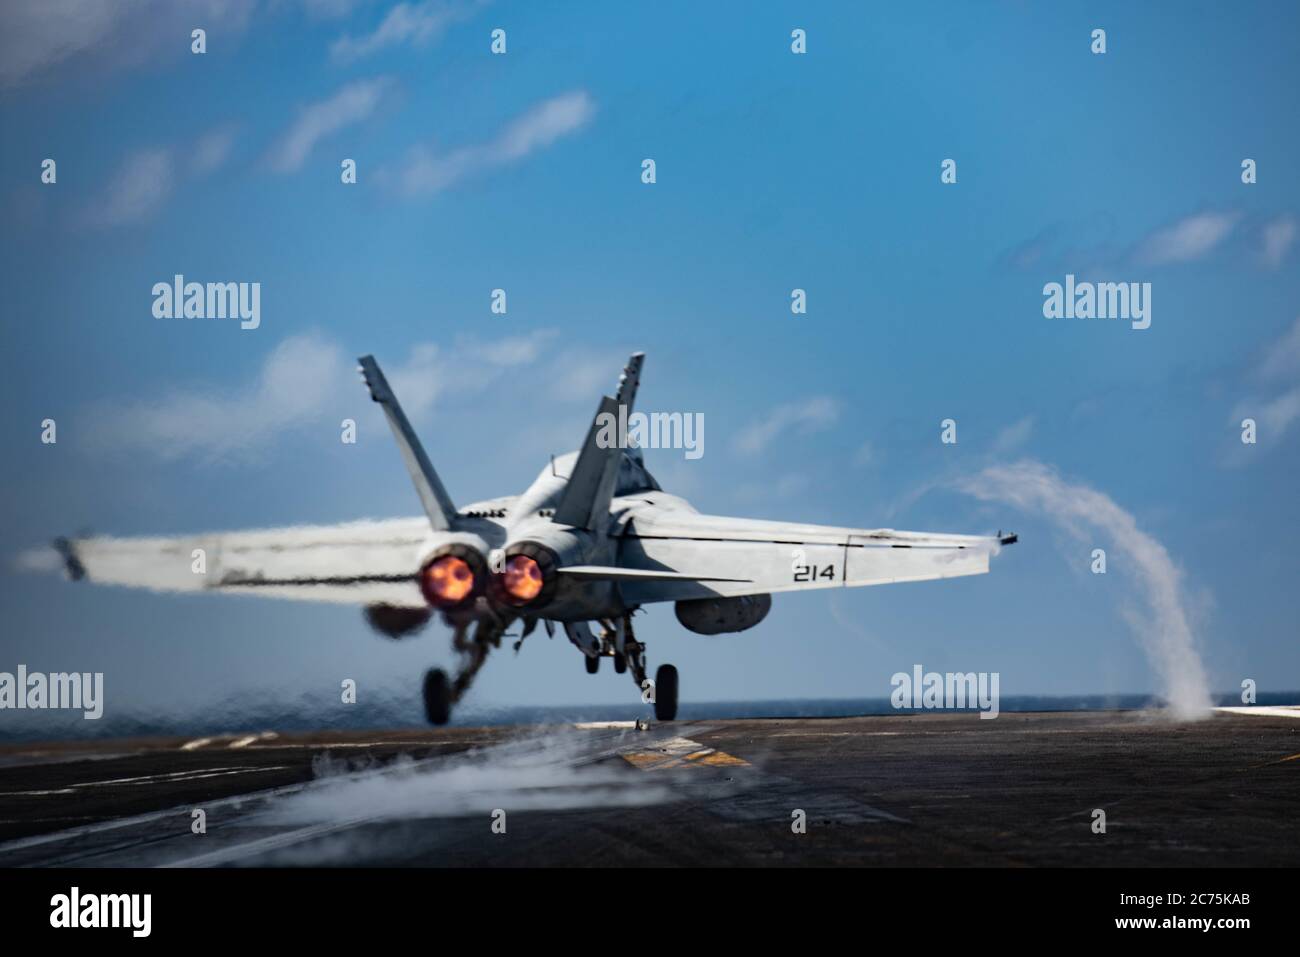 A U.S. Navy F/A-18E Super Hornet fighter aircraft, from the Royal Maces of Strike Fighter Squadron 27, launches from the flight deck of the Nimitz-class aircraft carrier USS Ronald Reagan during operations July 13, 2020 in the Indian Ocean. Stock Photo